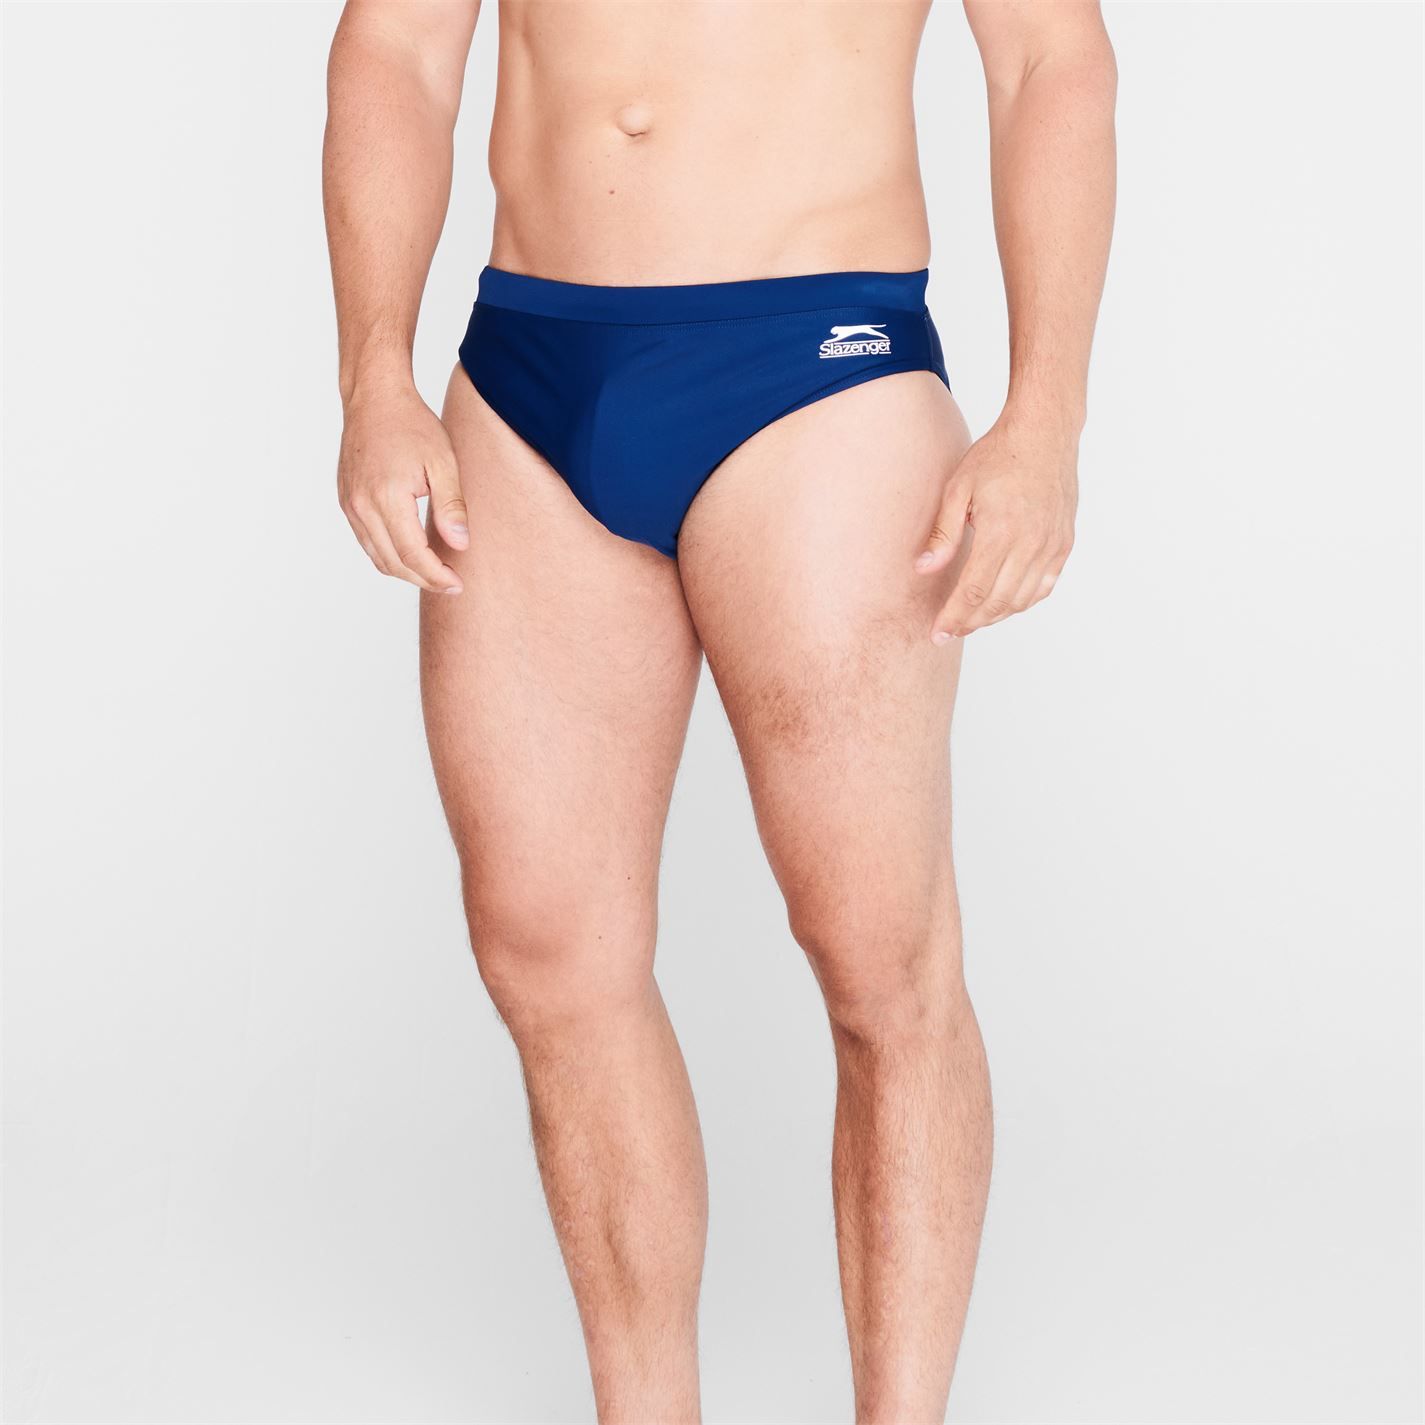 <h2>Slazenger Mens Swimming Trunks</h2>
Look cool this Summer at the beach or beside the pool in these Slazenger Swimming Trunks complete with contrasting side panels and Slazenger branding. Made with chlorine-resistant LYCRA® fiber to last up to 10 times longer than those with ordinary elastane. 

> Please note: The style you receive may vary from the image shown

> Mens Swimming Trunks
> Drawstring Waist
> Contrasting Side Panels
> Slazenger Branding
> 82% Nylon / 18% chlorine resistant LYCRA®
> Machine Washable
> Keep Away From Fire